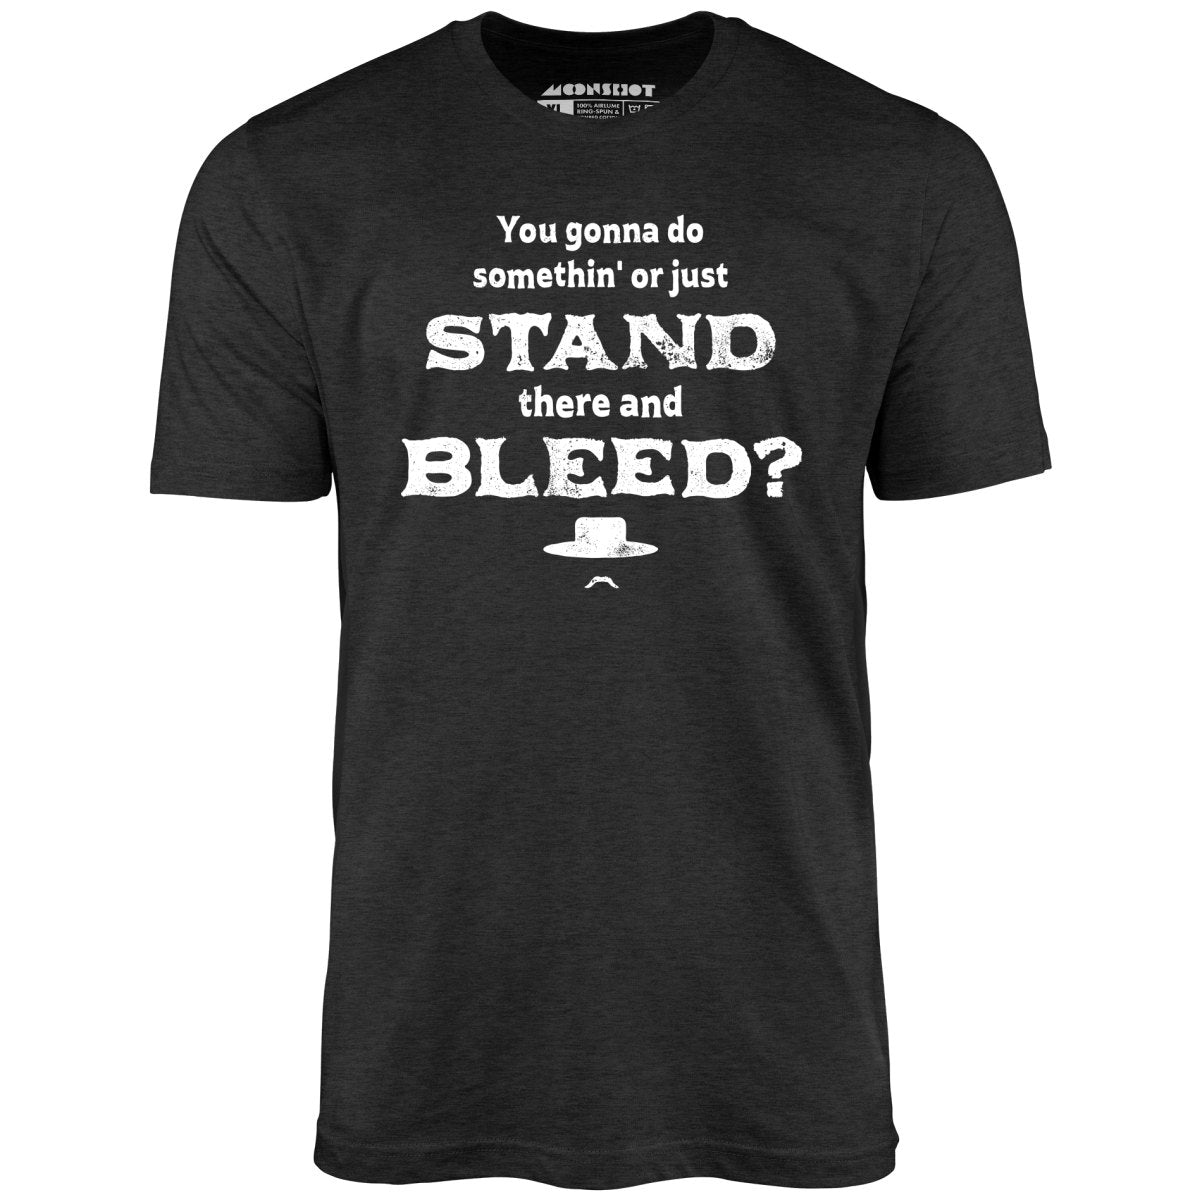 Tombstone Stand There and Bleed - Unisex T-Shirt